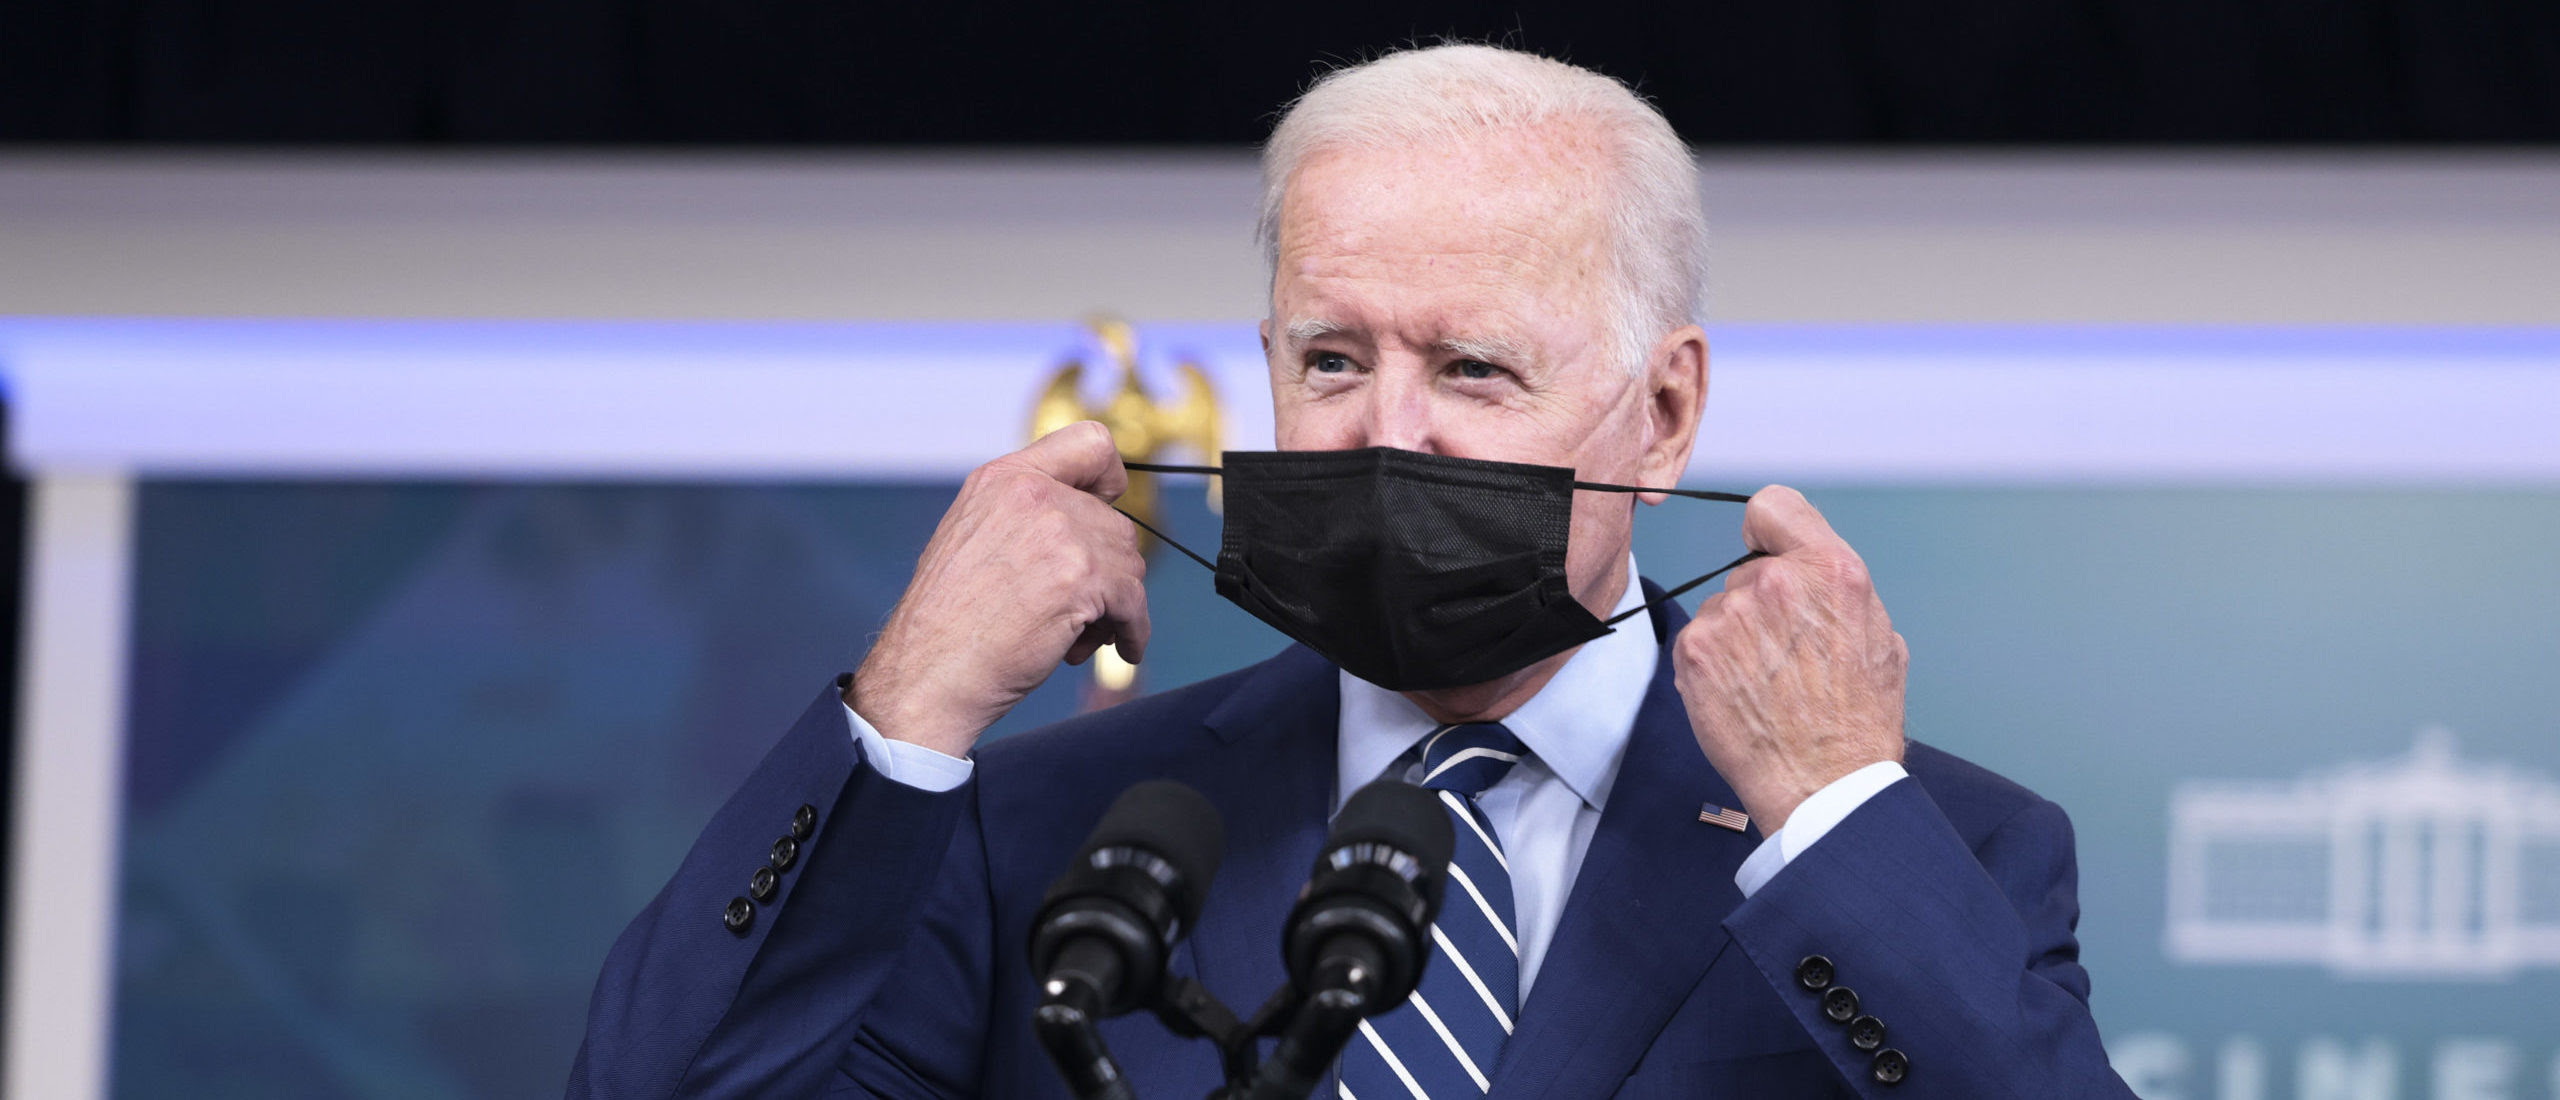 Oil Prices Rise After Biden Announces Emergency Action